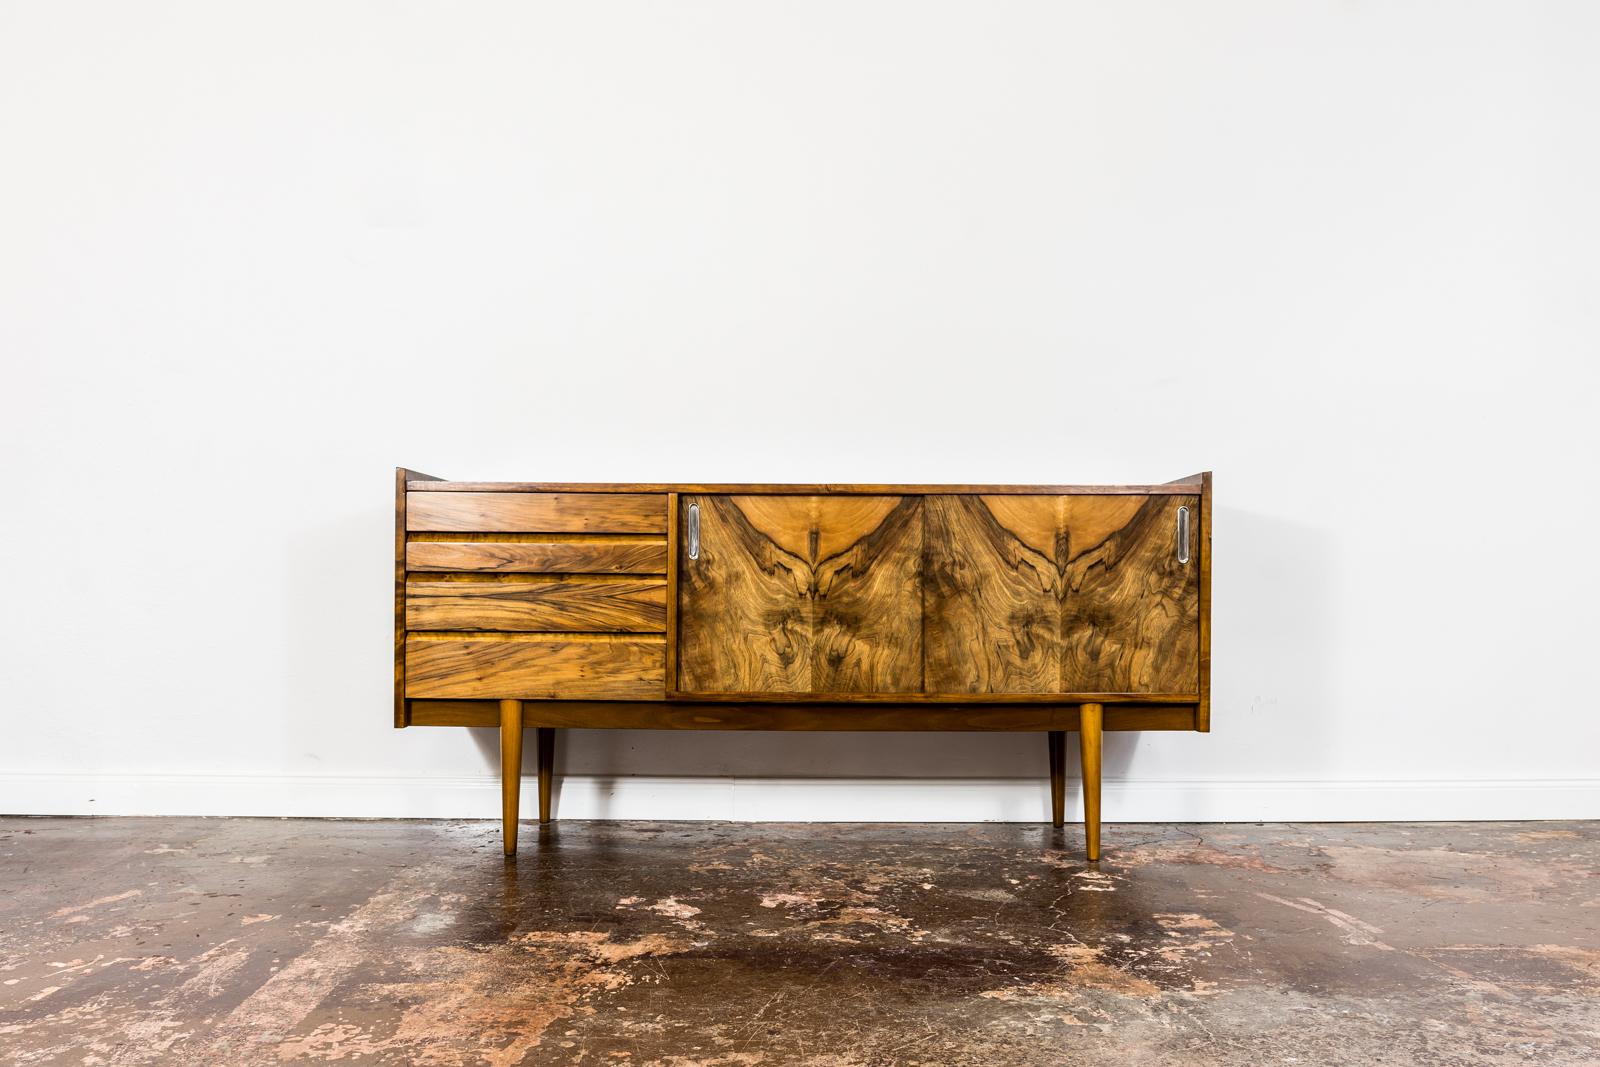 Sideboard by Slupskie Furniture Factory, 1960's, Poland.
Walnut veneer sideboard has been restored and refinished.
Case raised on solid wooden construction and legs.
Sideboard has 2 sliding doors with metal handles, 2 short removable shelves and 4